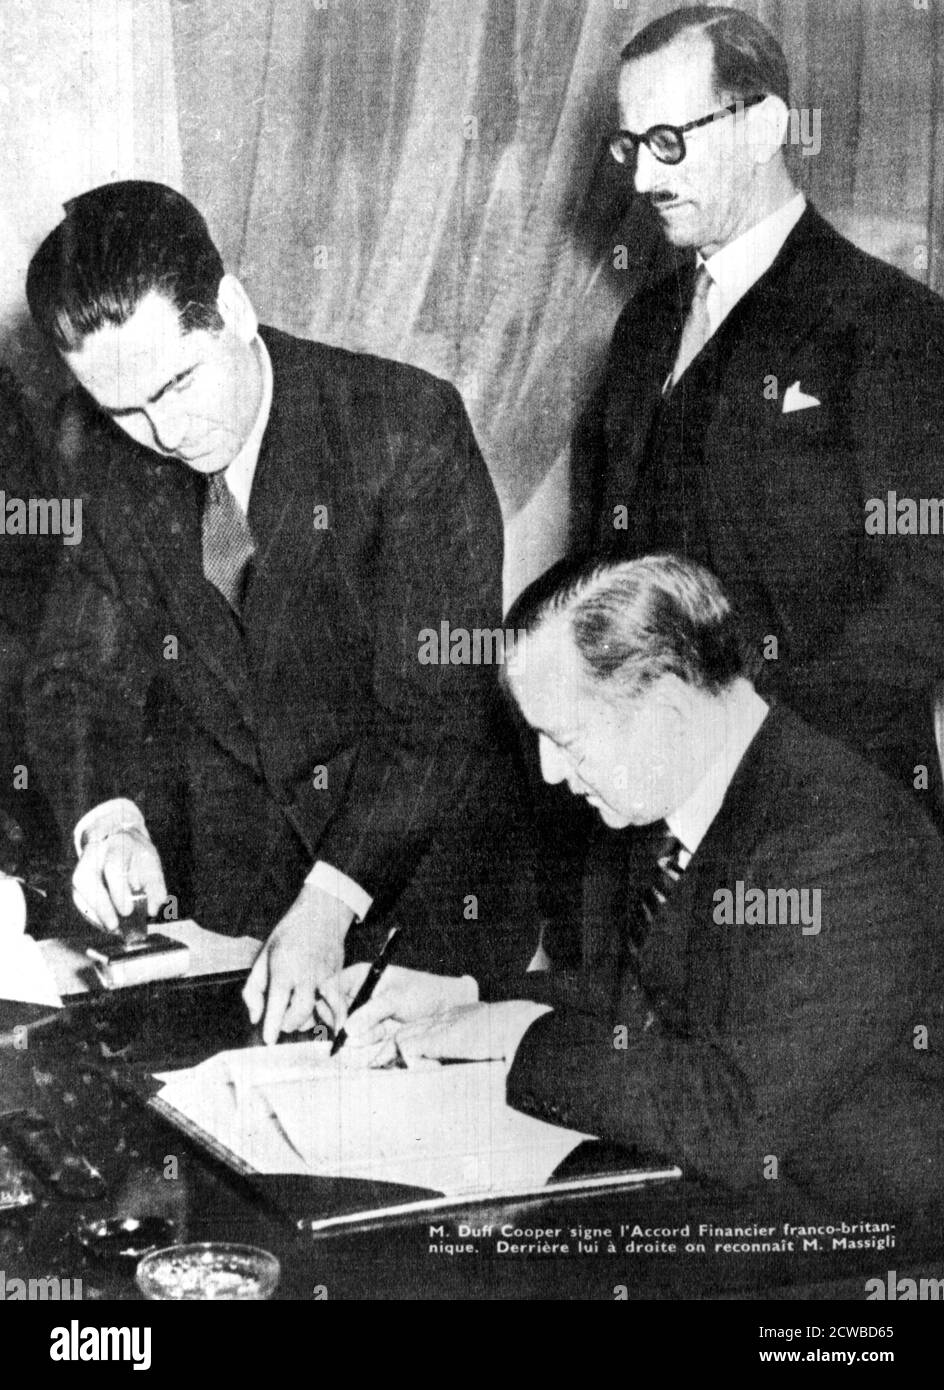 Signing of financial accord between Britain and the Free French, Algiers, 8 February 1944. Duff Cooper, British Government liasion to the Free French, signs the document. Rene Massigli, the Free French Commissioner for Foreign Affairs, stands behind him. The photographer is unknown. Stock Photo